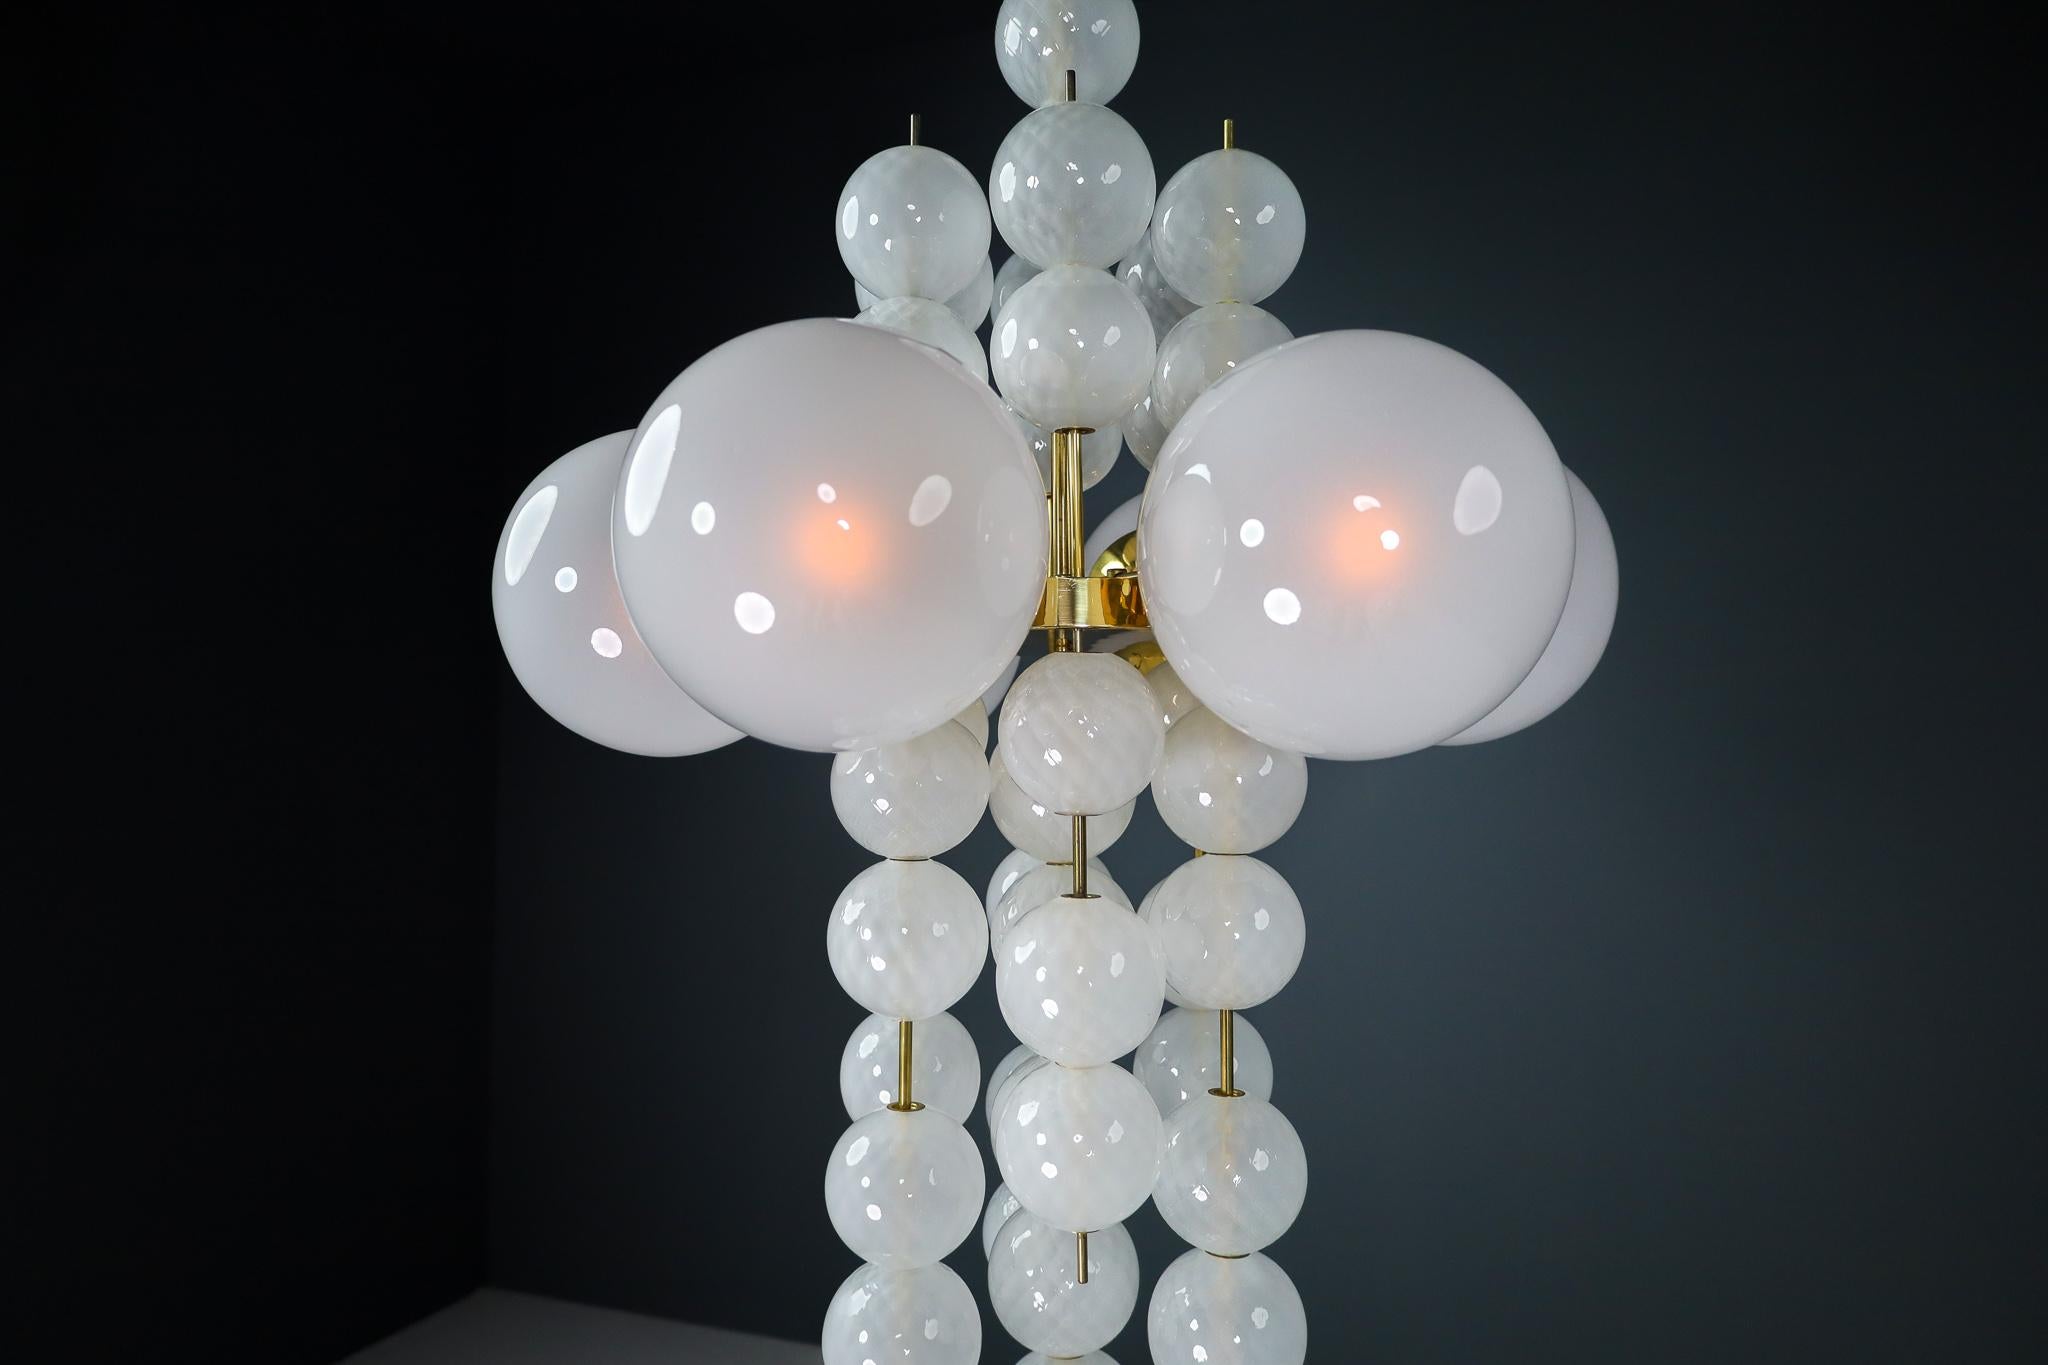 Czech XL Hotel Chandelier with Brass Fixture and Hand-Blowed Frosted Glass Globes